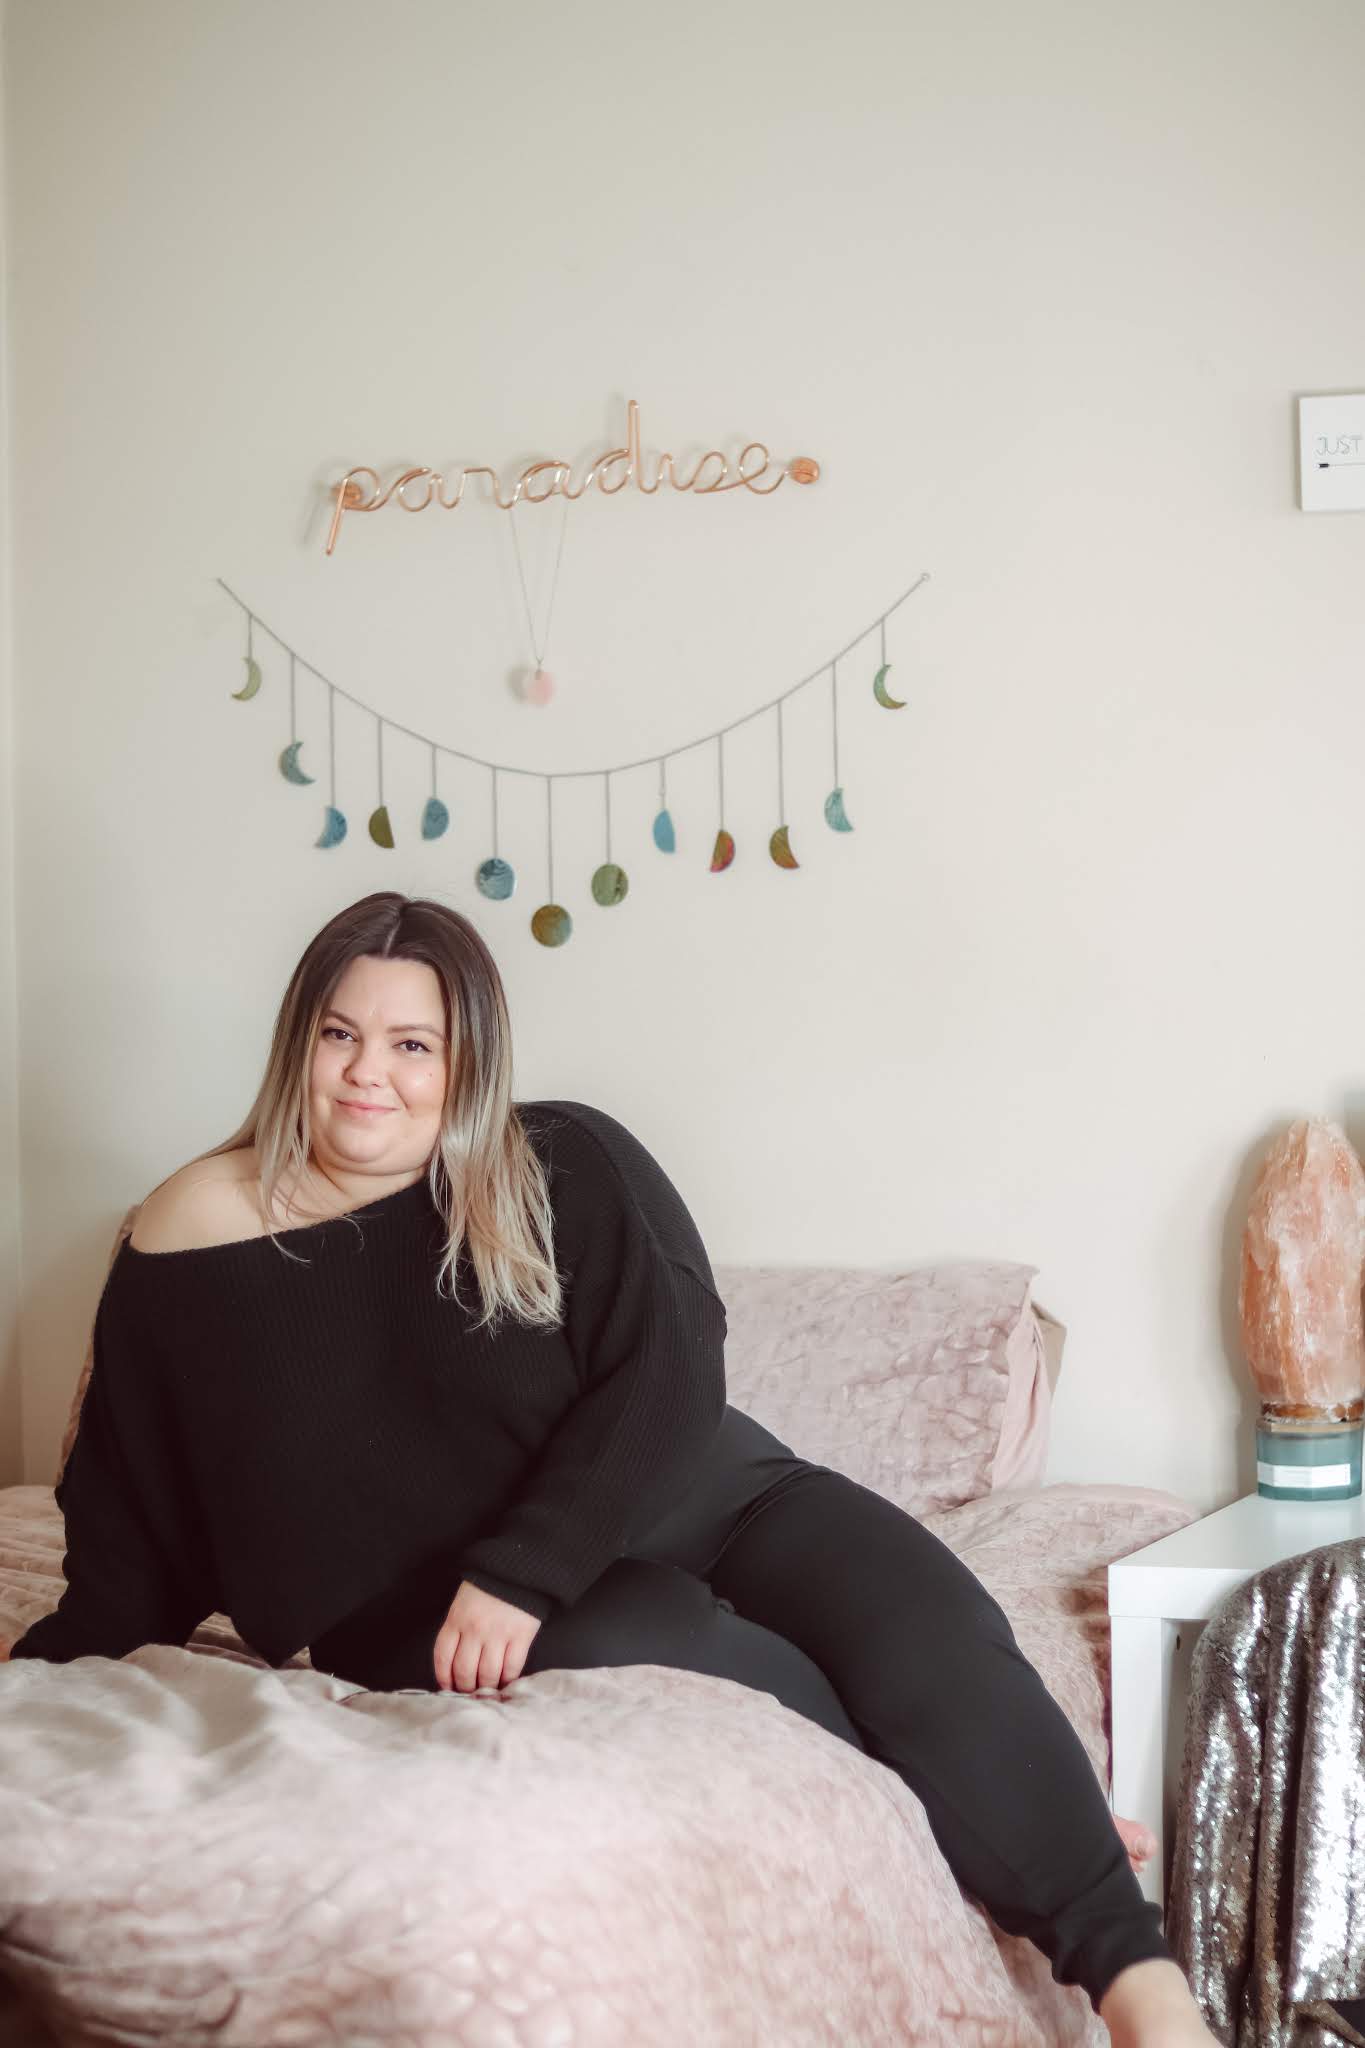 Chicago Plus Size Petite Fashion Blogger, influencer, and model Natalie in the City reviews Pretty Little Thing